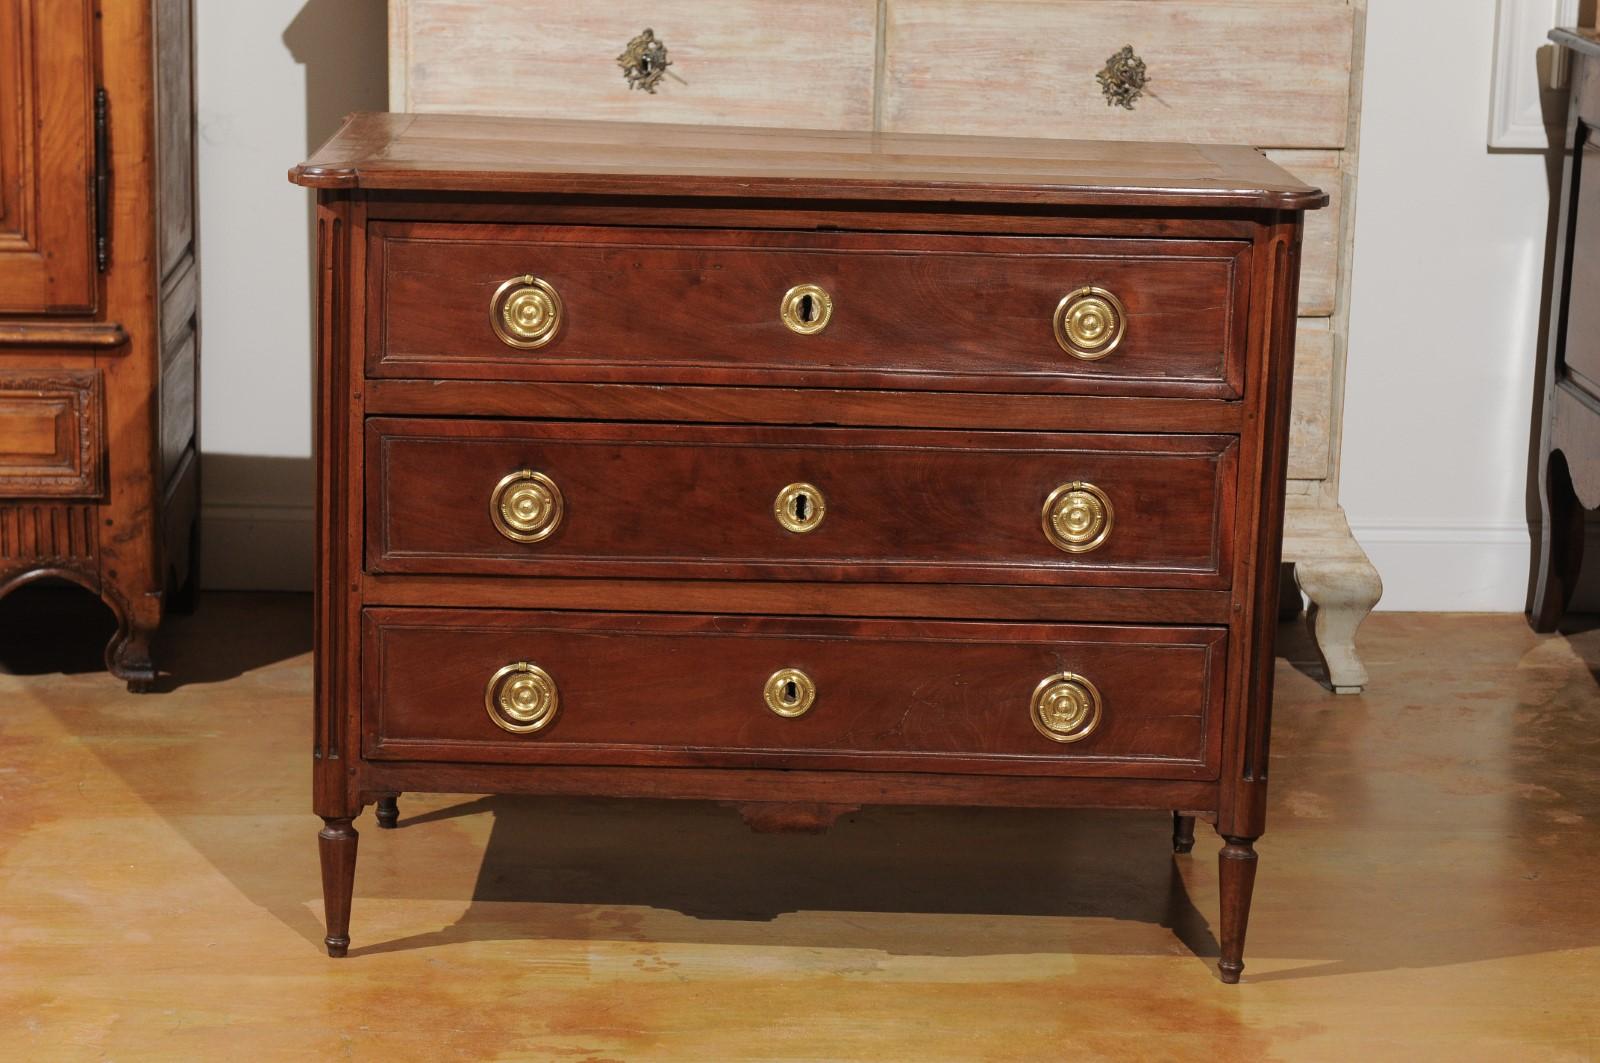 A French Louis XVI period walnut three-drawer commode from the last quarter of the 18th century, with original bronze and brass hardware, banded drawers and fluted legs. Born under the reign of the last monarch of the Ancien Régime, this French